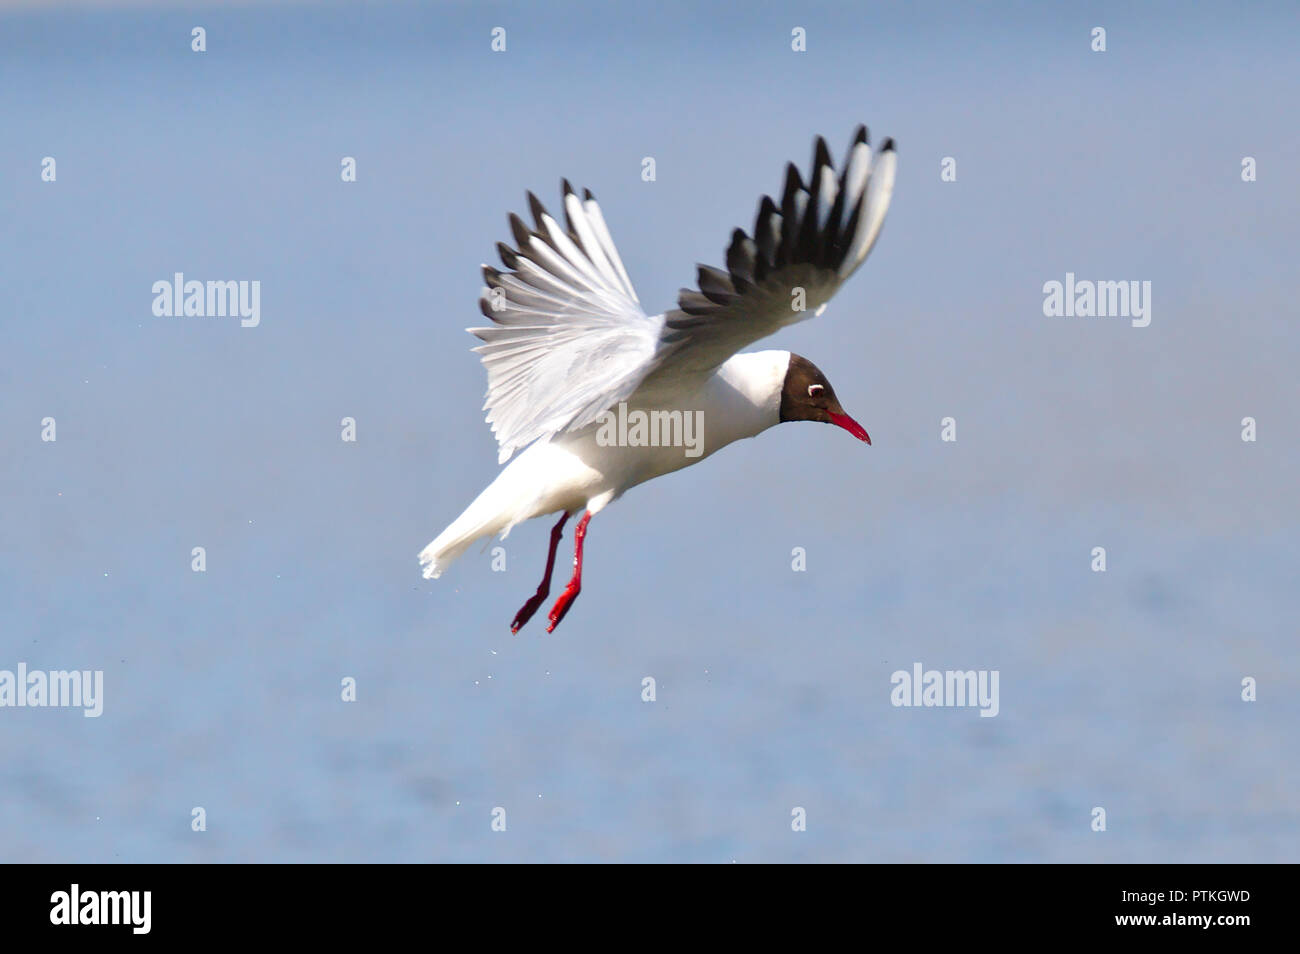 White seabird in flight. Wings spread and ready to land moment freeze frame Stock Photo